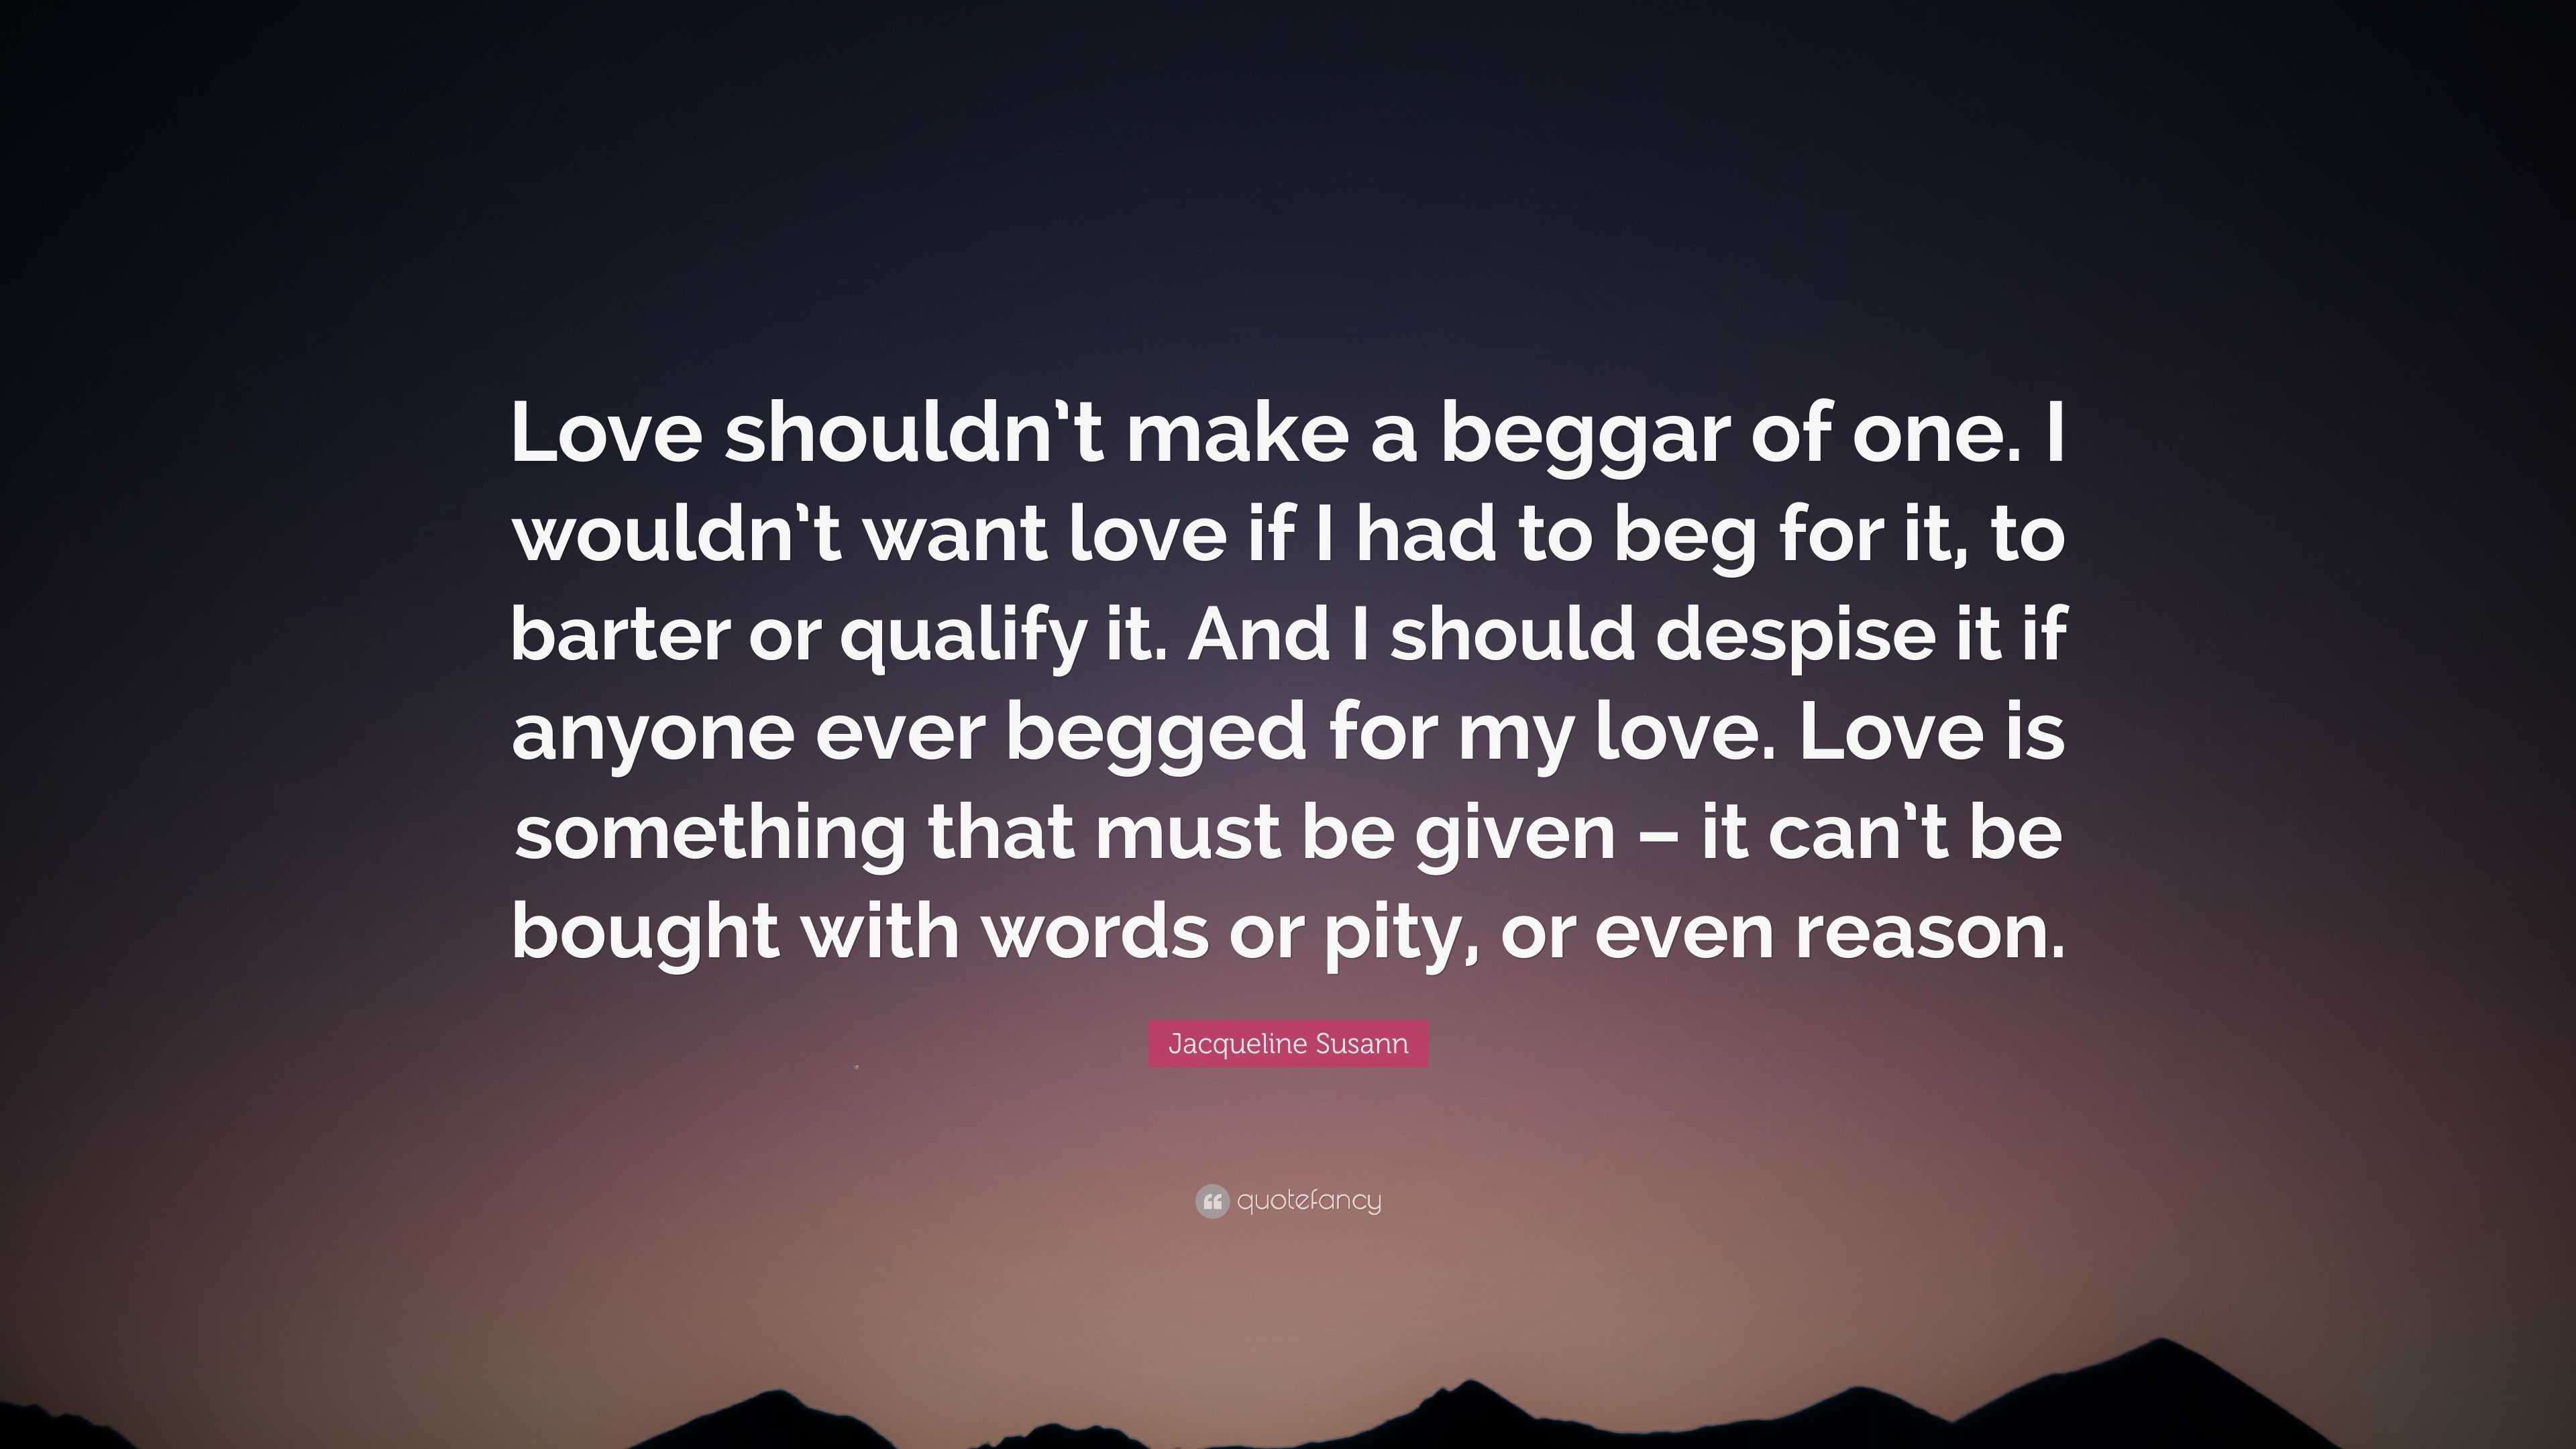 Jacqueline Susann Quote “Love shouldn t make a beggar of one I